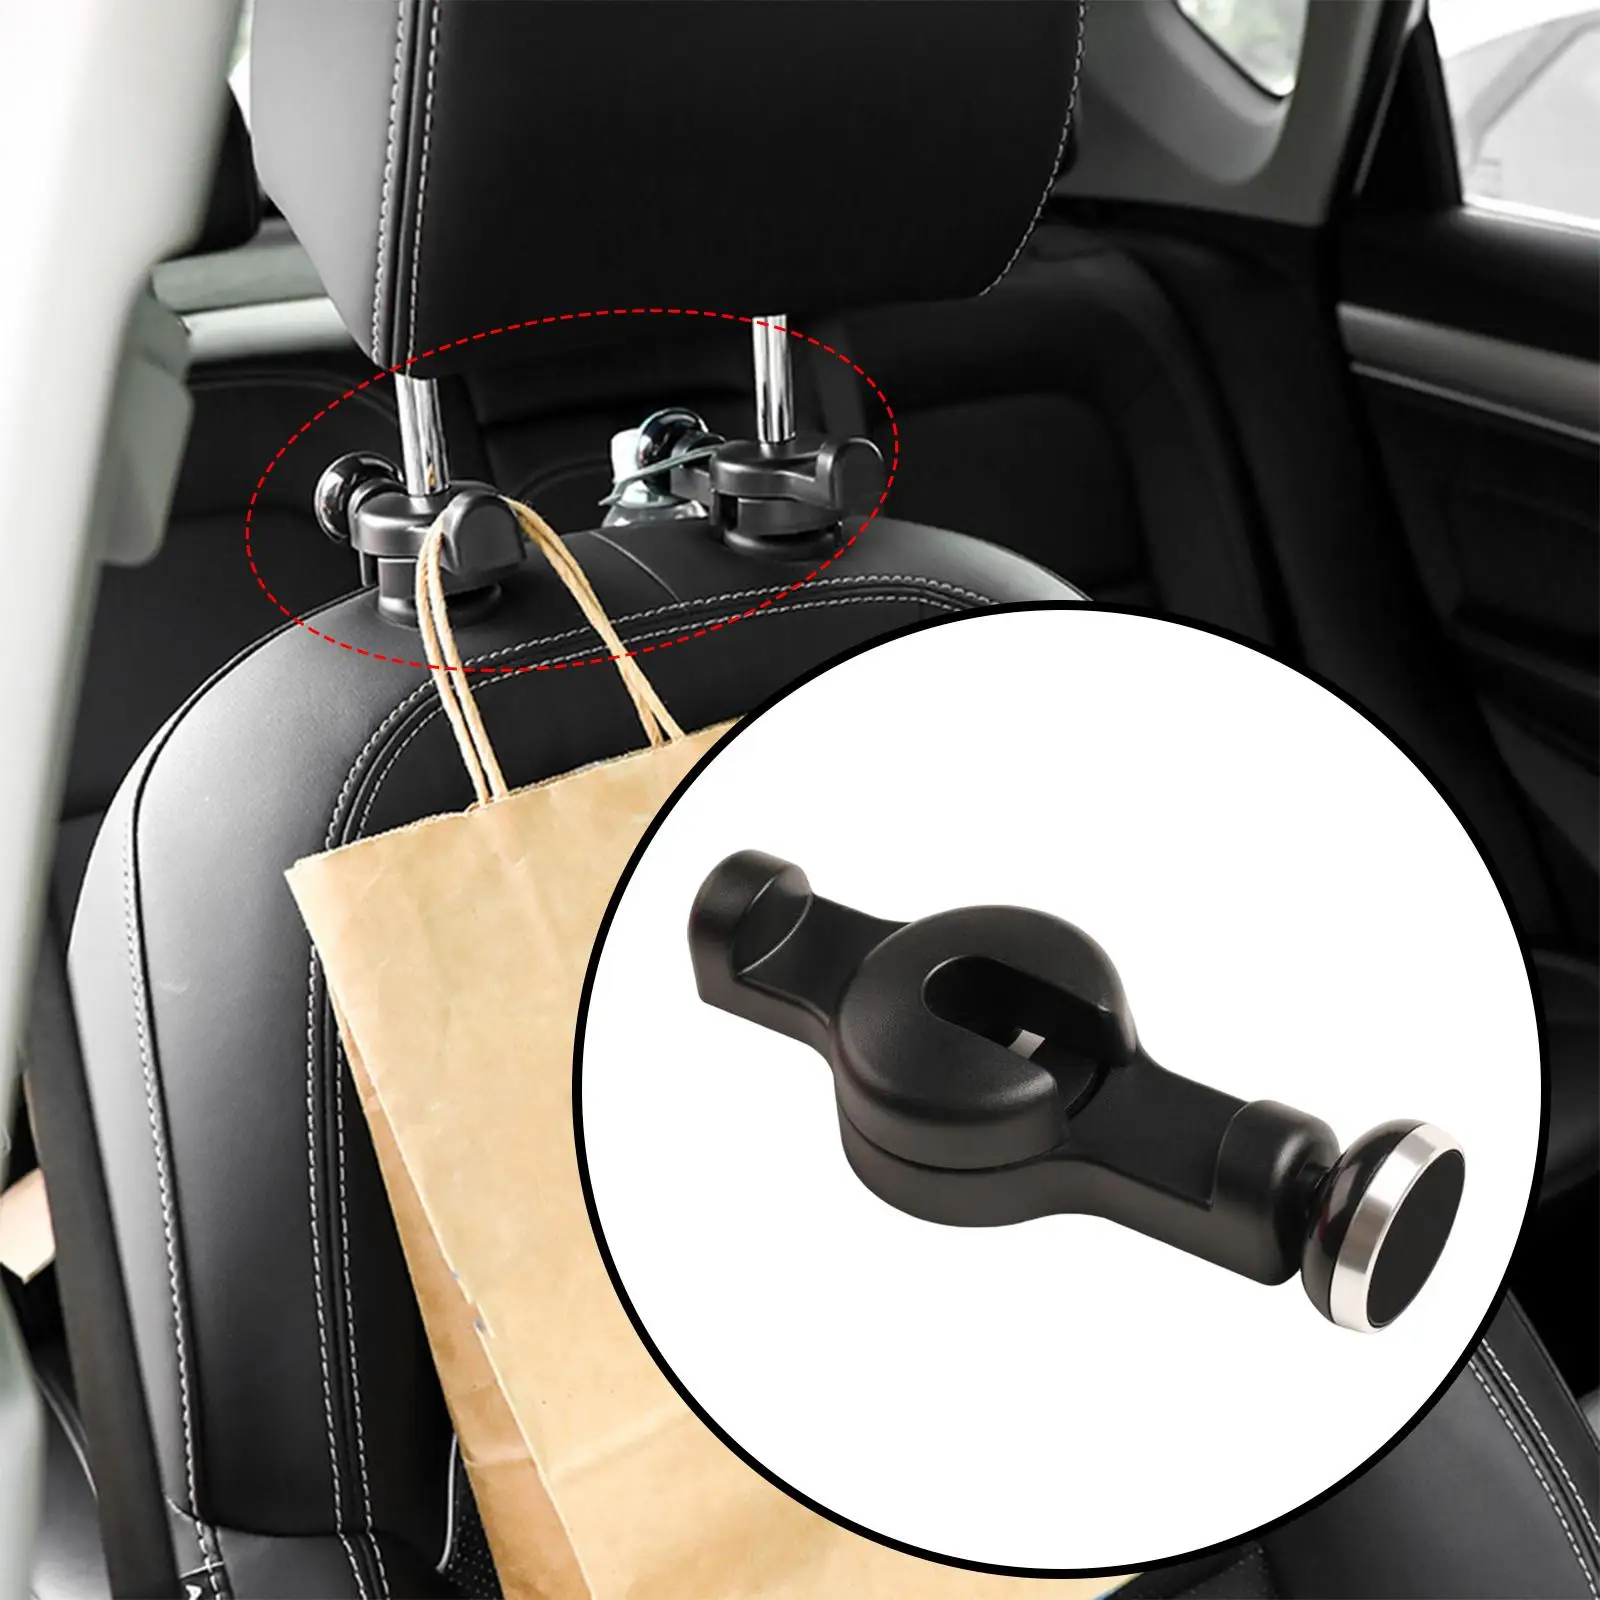 Car Seat Back Hook with Phone Holder Multifunctional 360 Rotation Universal Accessories Hanger for Purse Bags Grocery